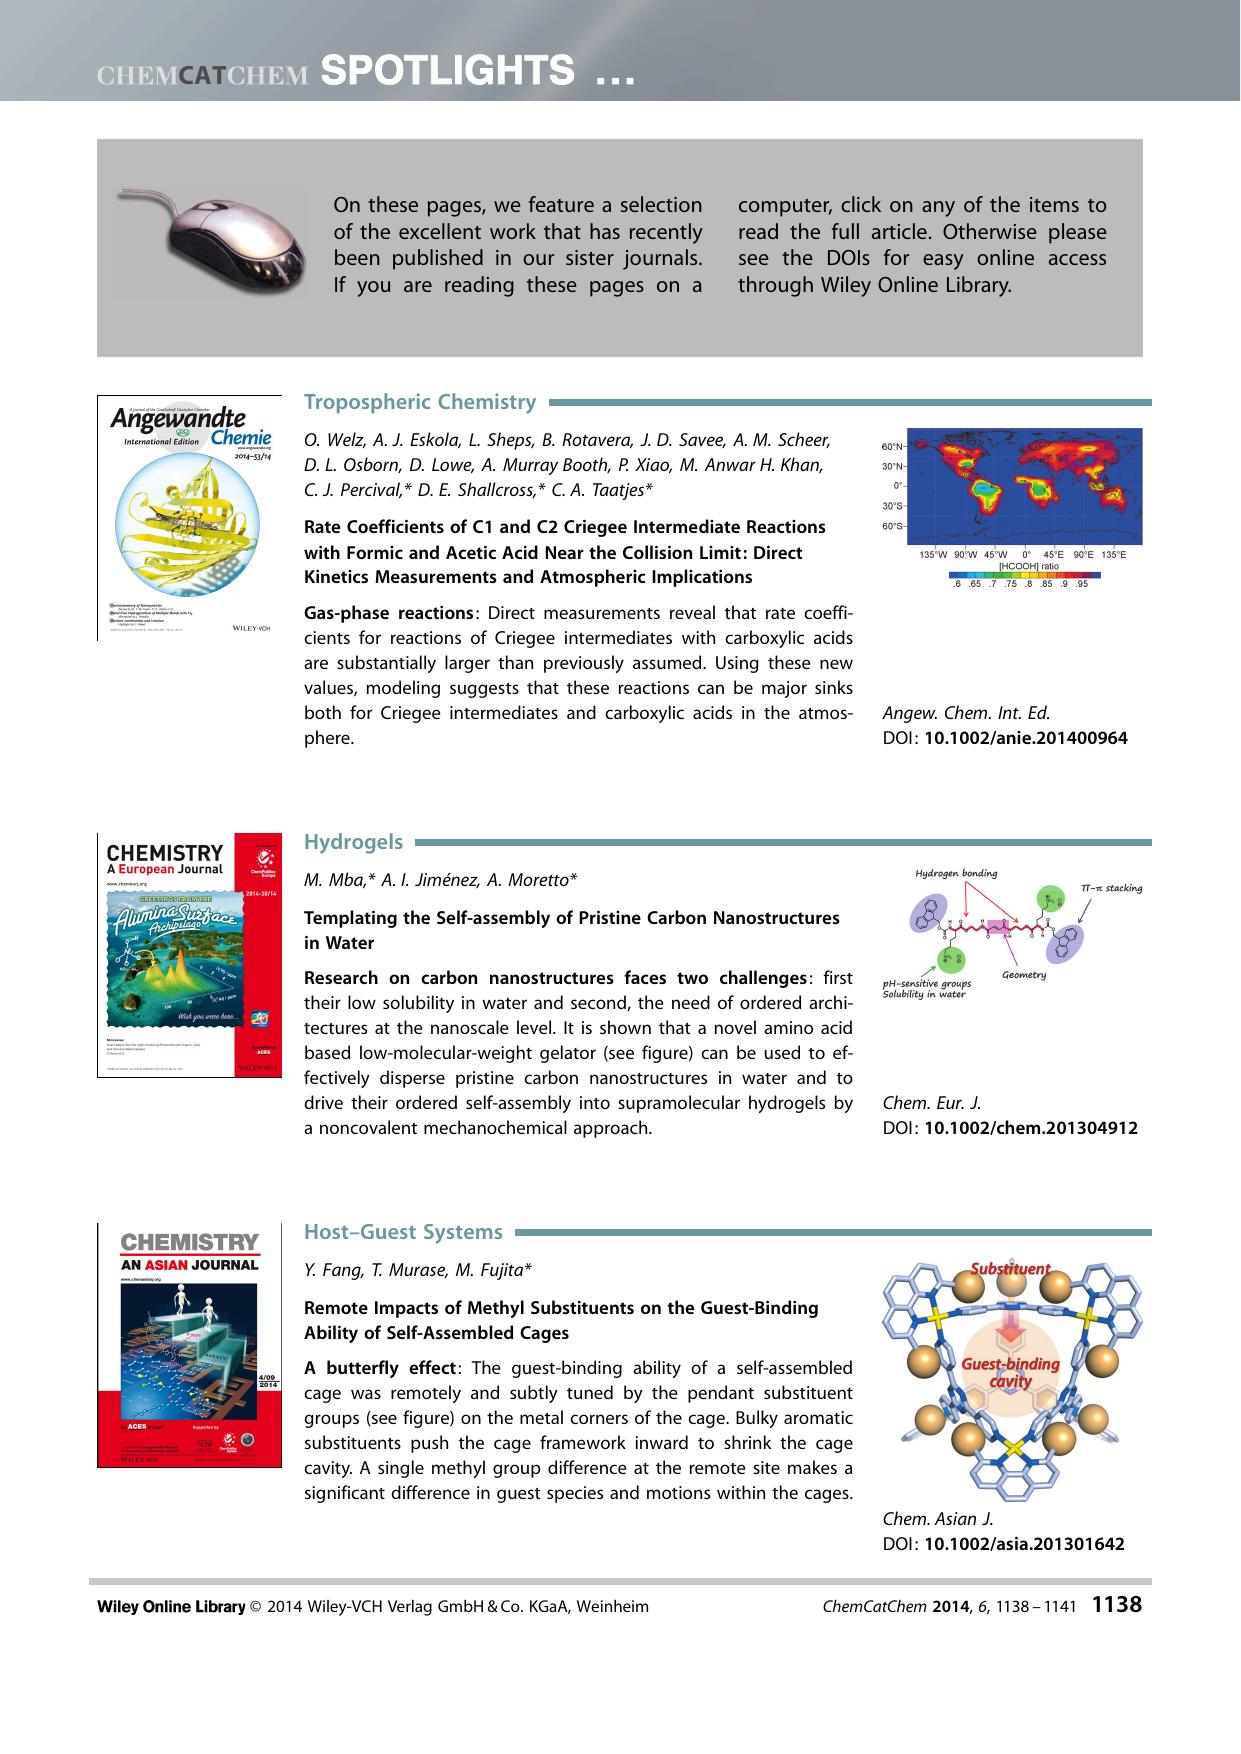 Spotlights on our sister journals: ChemCatChem 52014 by Unknown